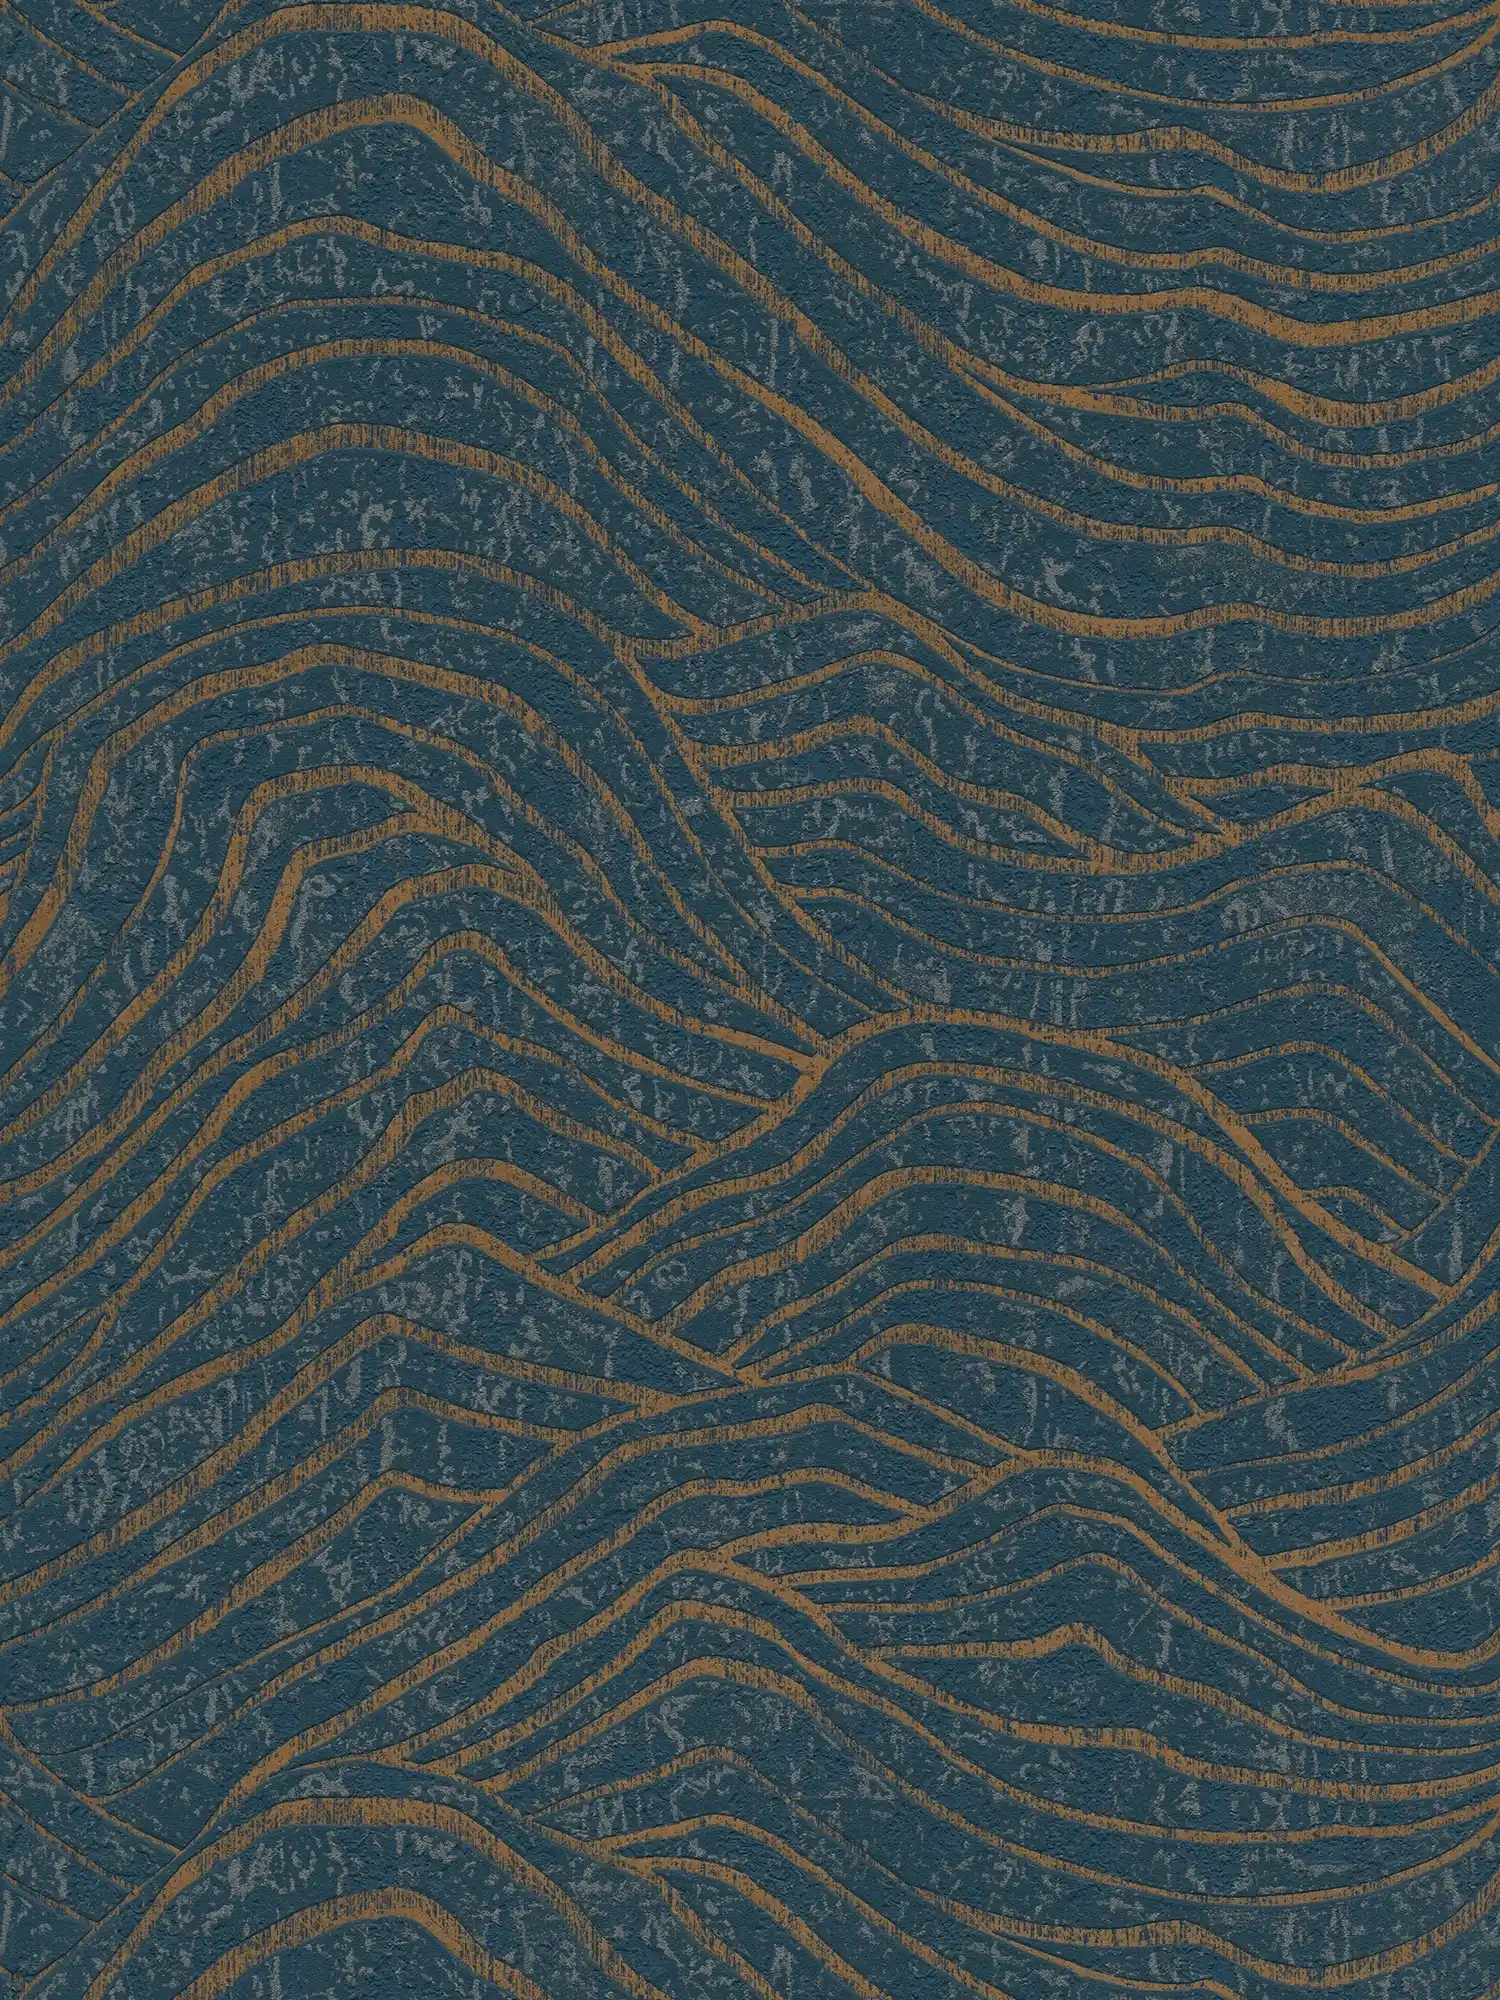 Wallpaper with abstract hill pattern - dark blue, gold
